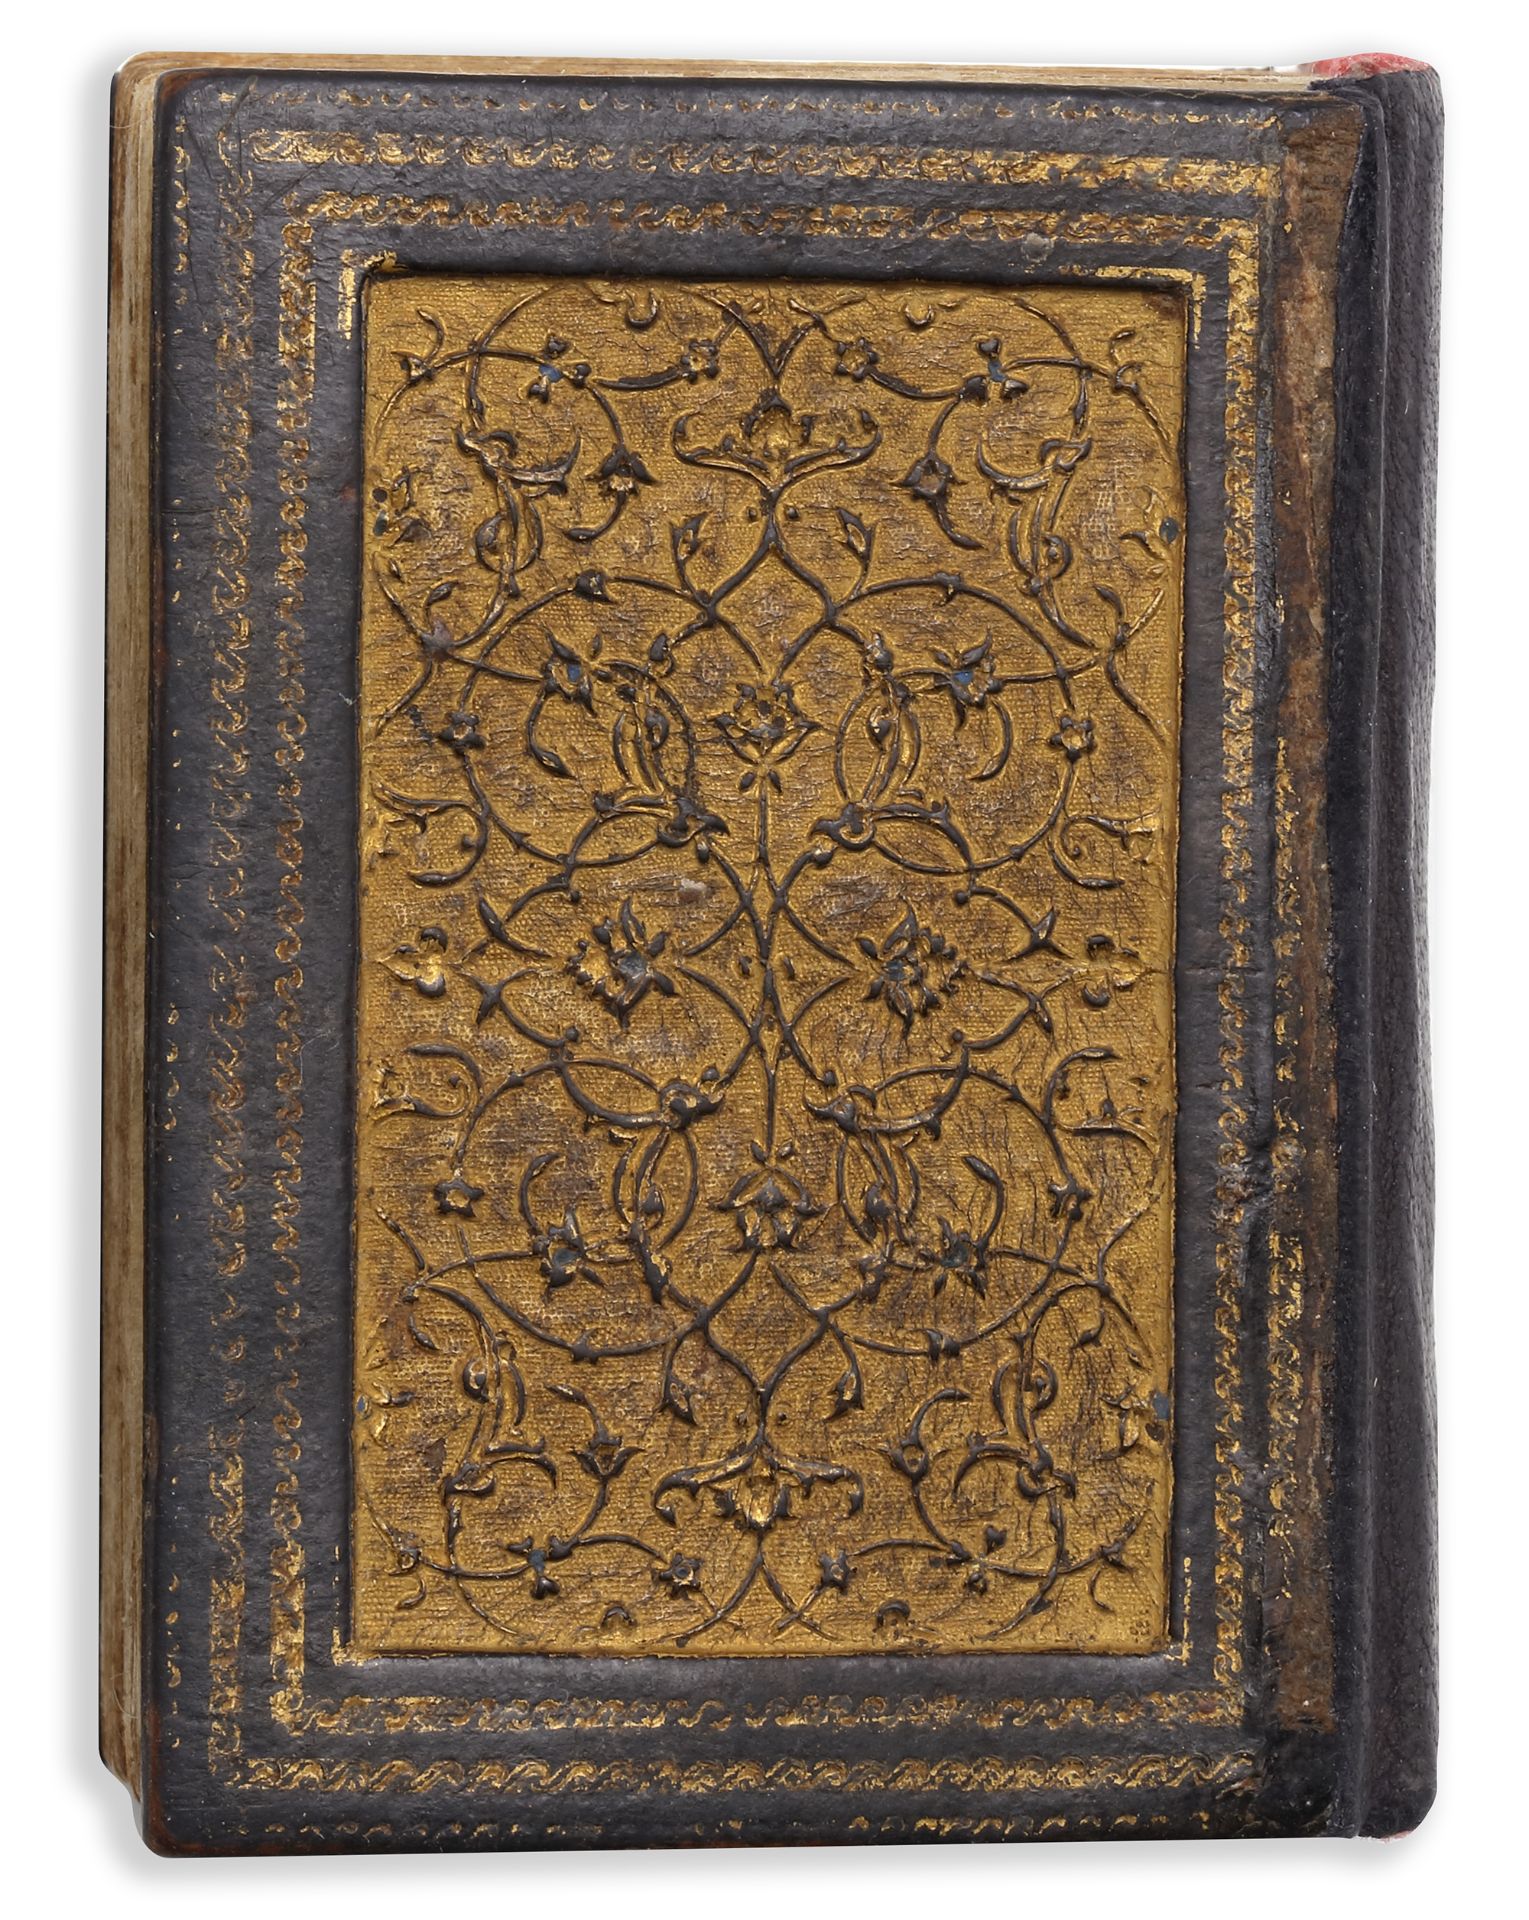 AN OTTOMAN MINIATURE QURAN DATED 945 AH/1538 AD - Image 8 of 16